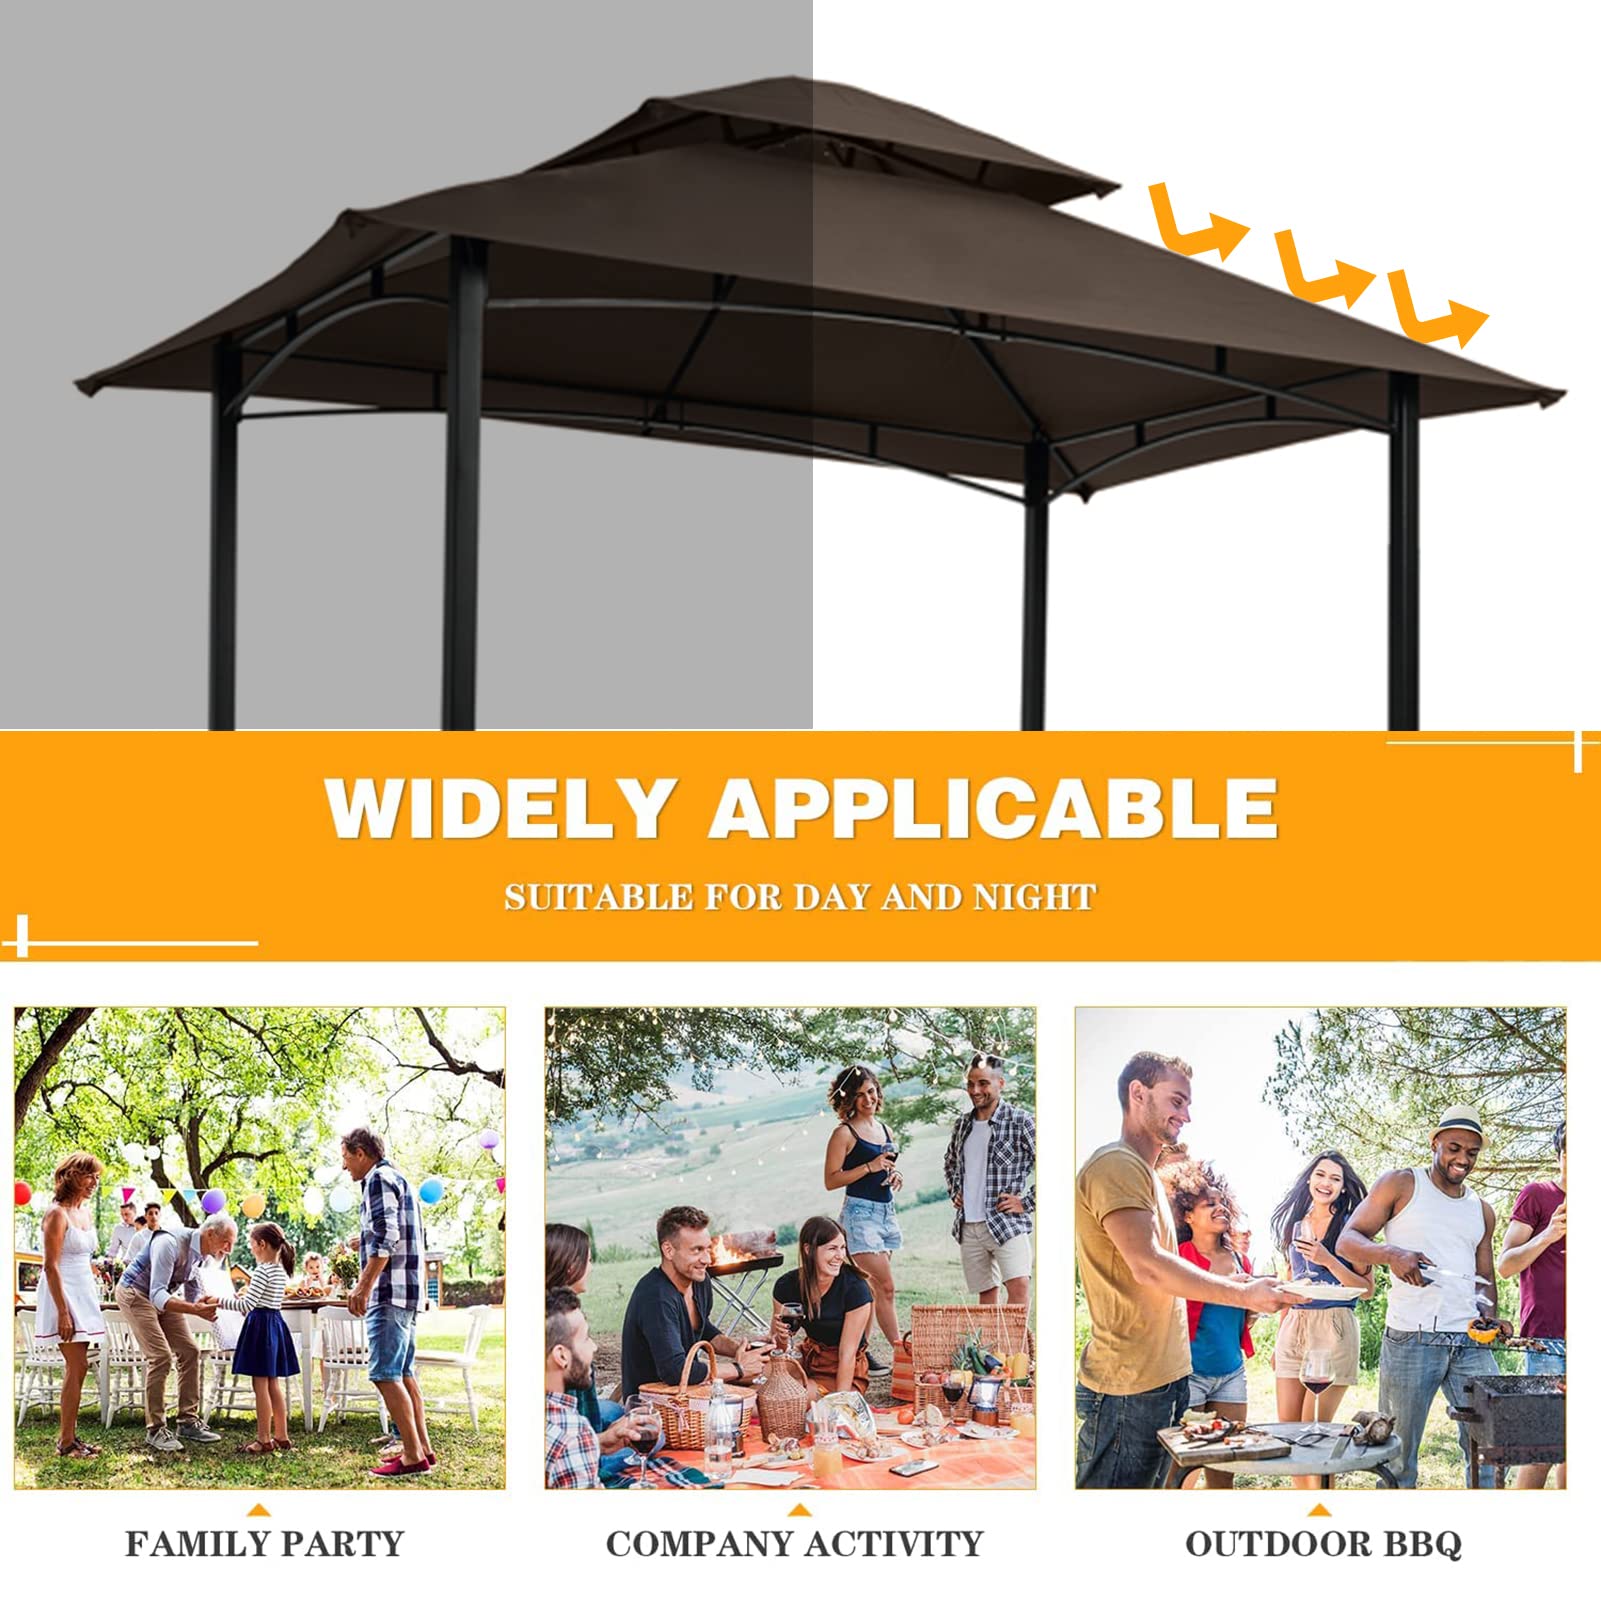 8x5 FT Grill Gazebo Canopy, Outdoor BBQ Grill Gazebo Shelter Tent, 2 Tier Waterproof Top Canopy with Side Metal Shelves for Outdoor, Patio, Backyard, Party, Brown